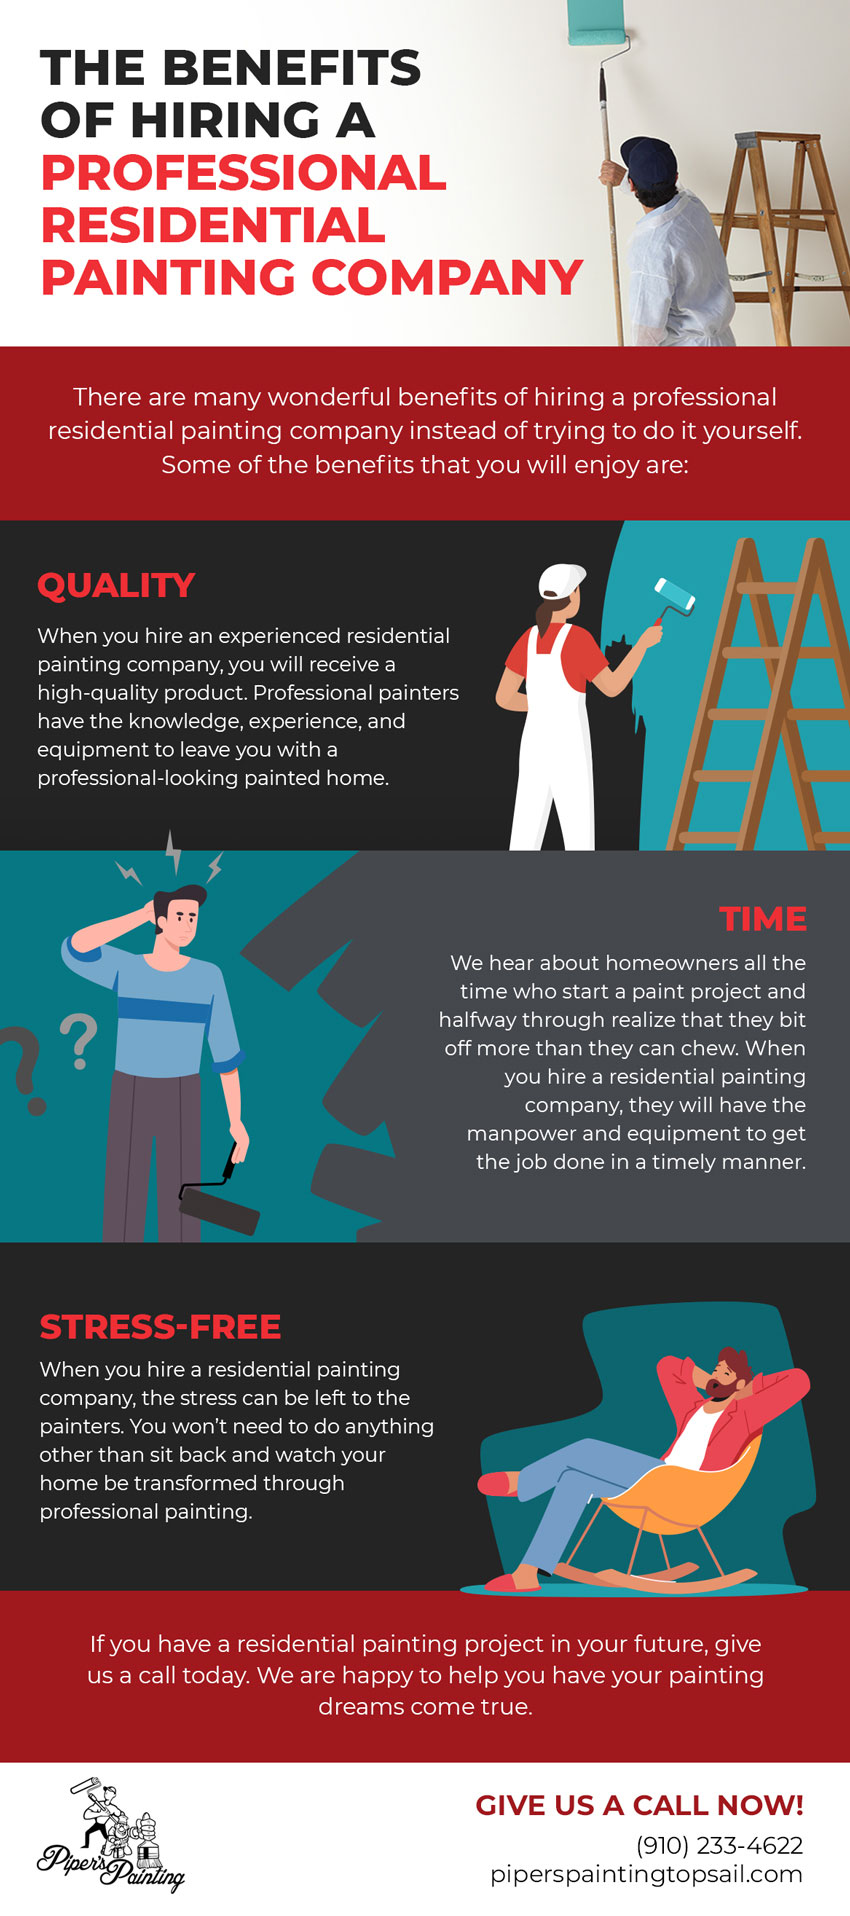 The Benefits of Hiring a Professional Residential Painting Company